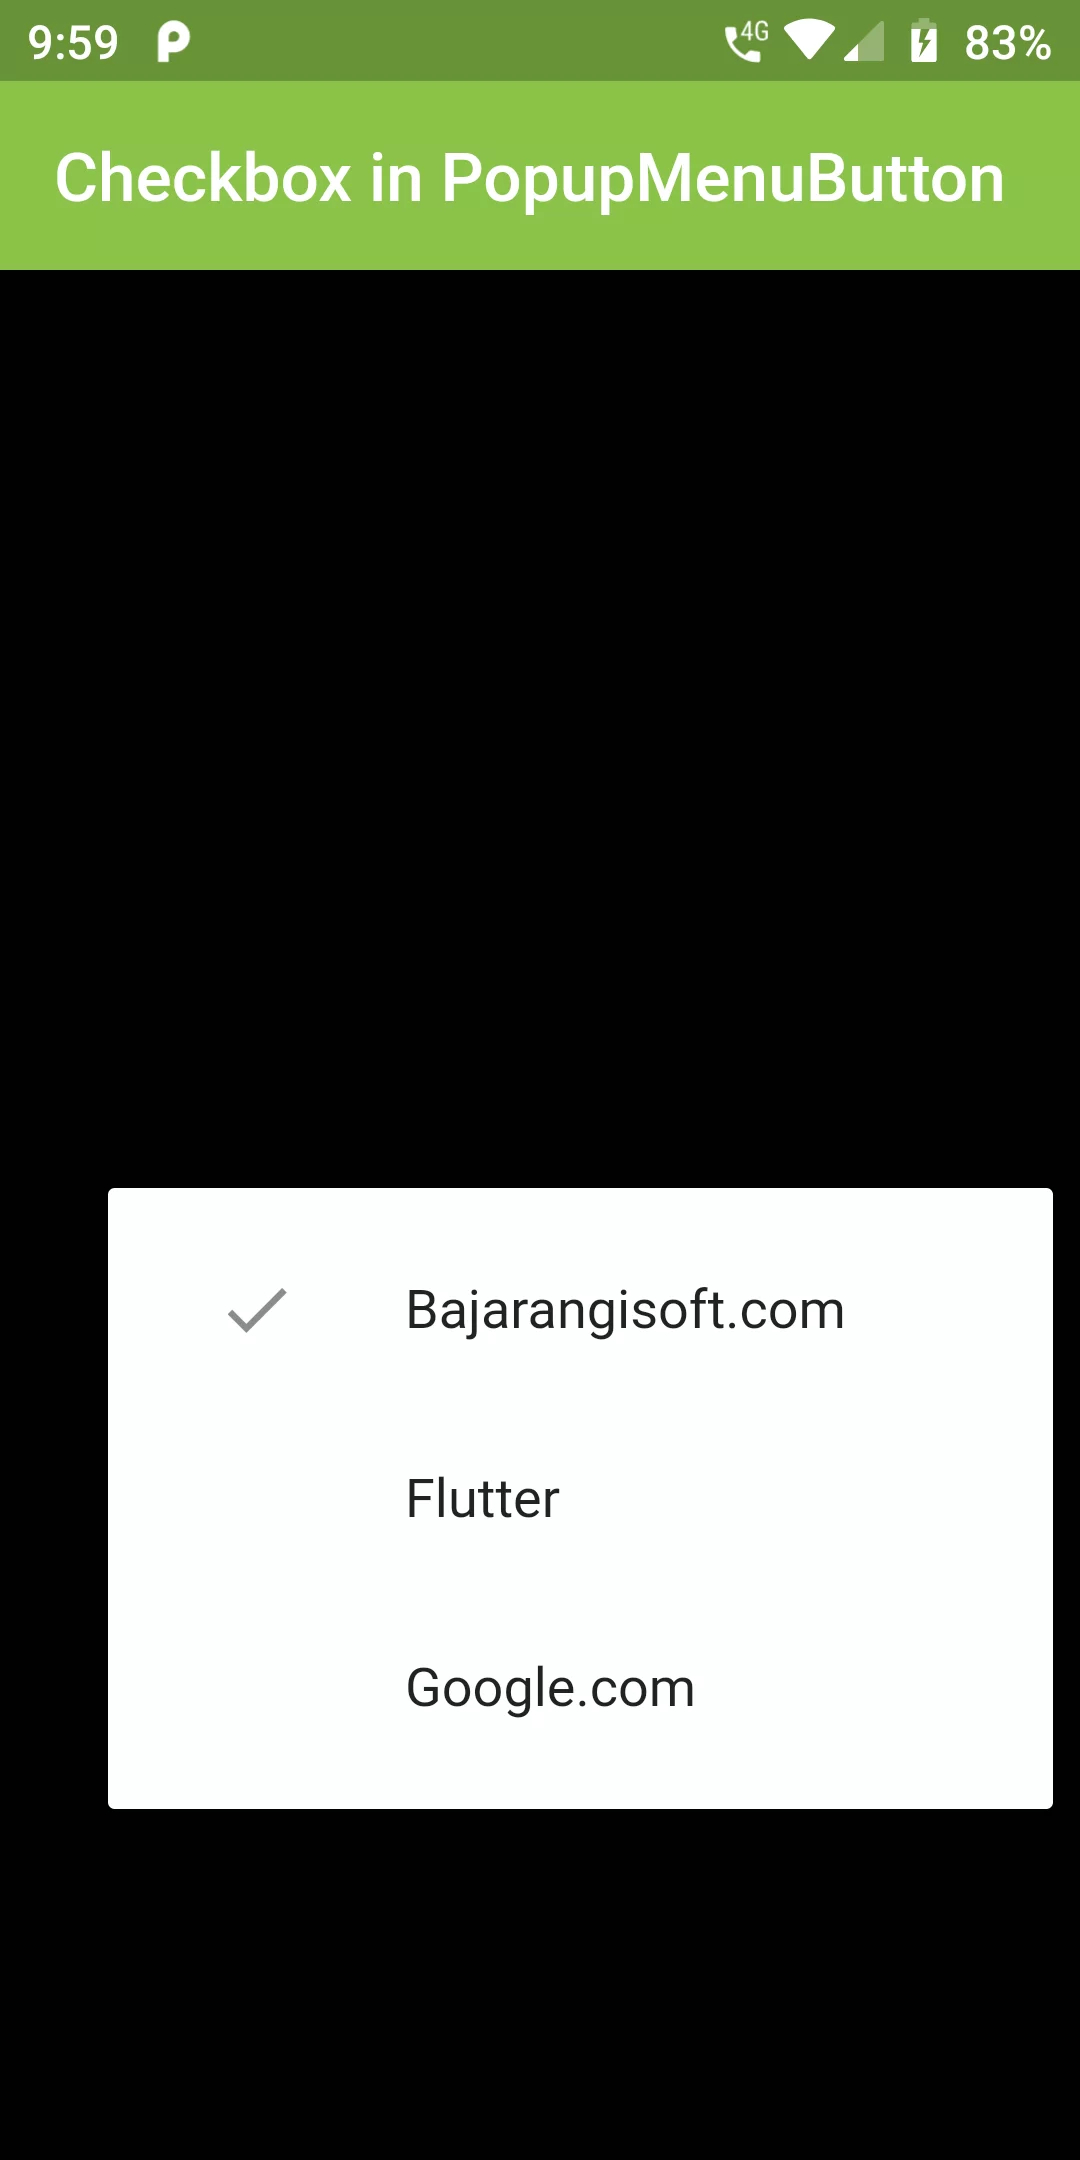 How To Use Checkbox Popup Menu Botton Using Flutter App